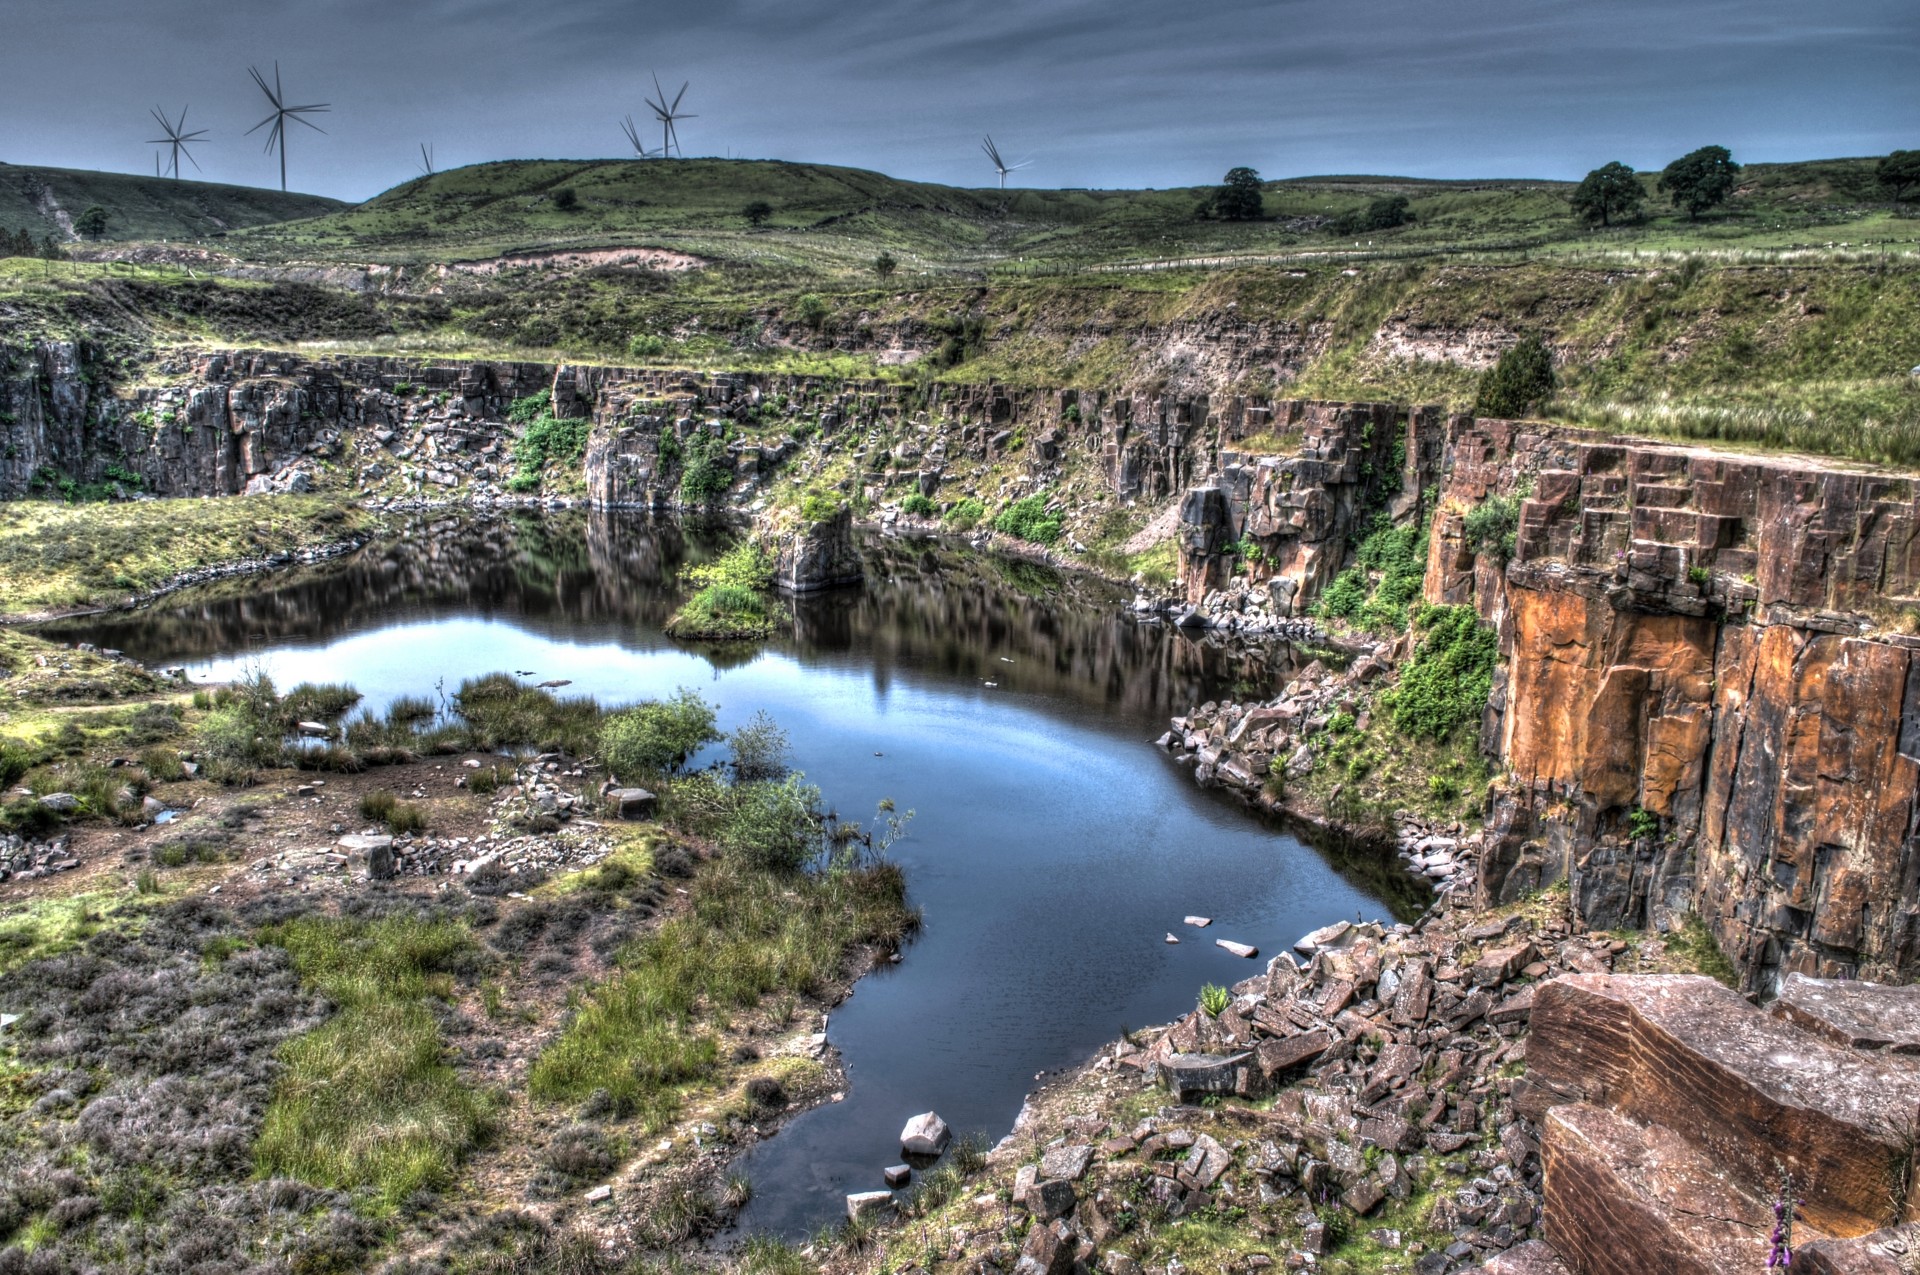 A disused quarry in the North of England